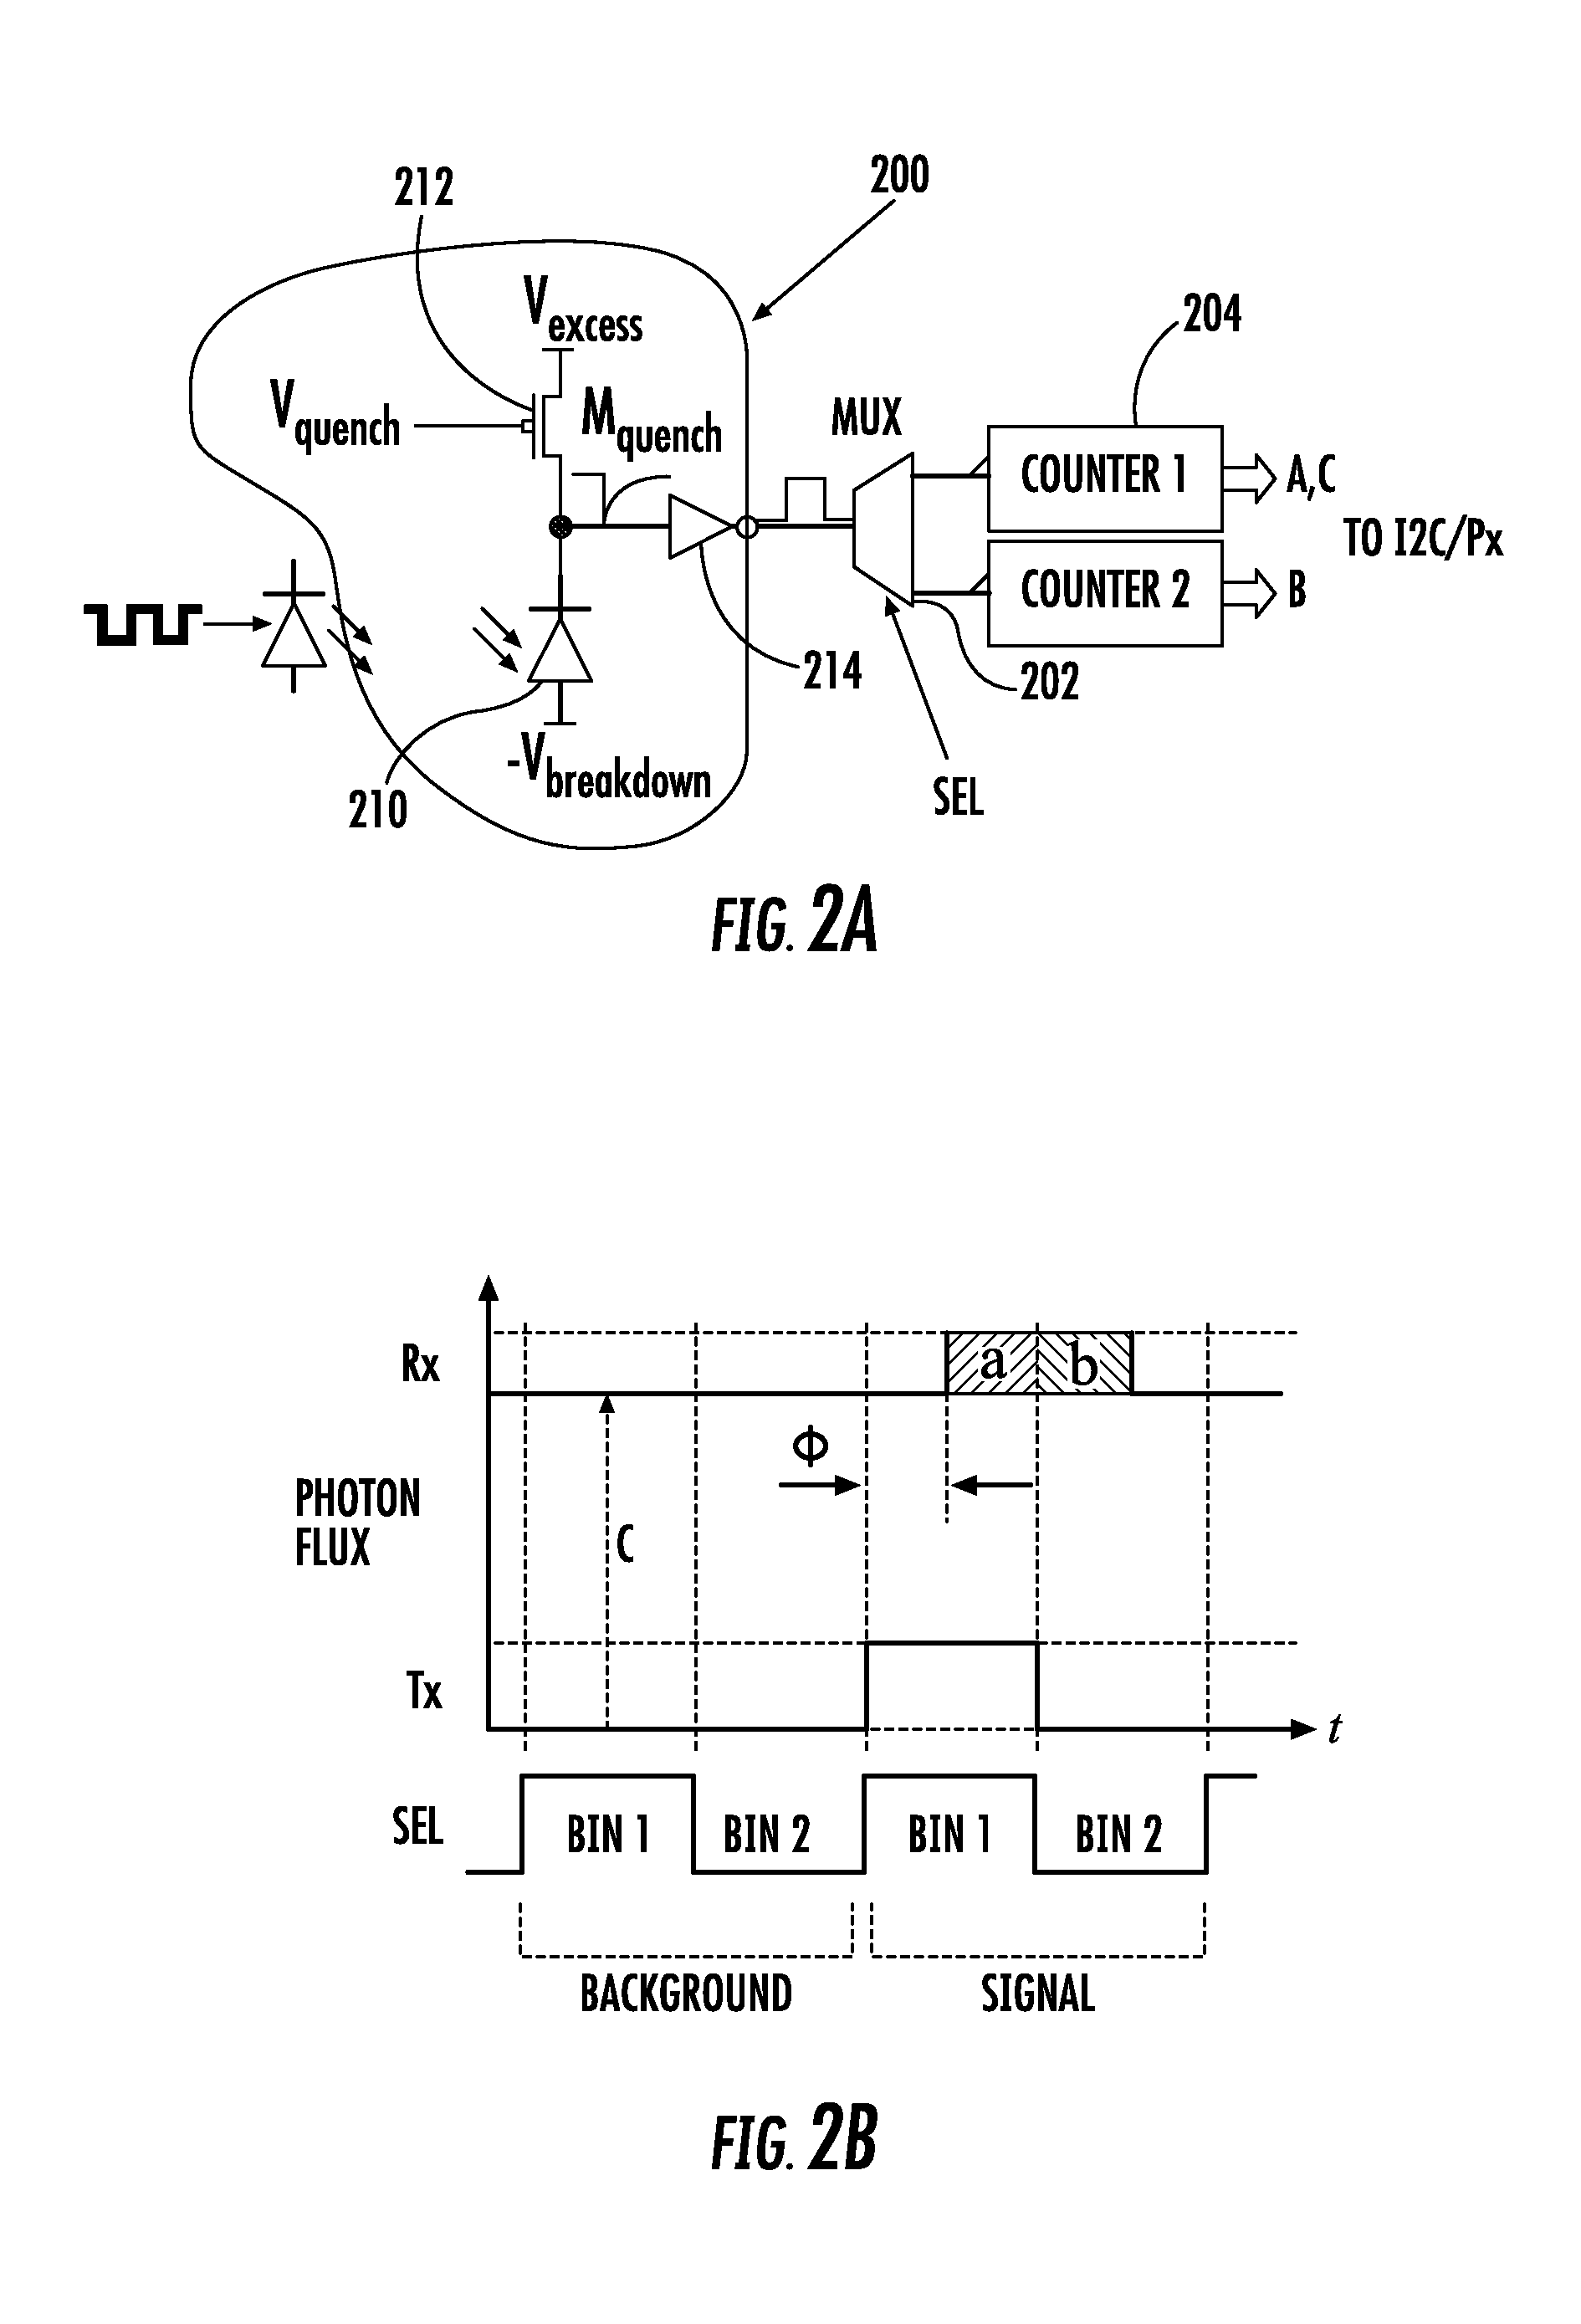 Application using a single photon avalanche diode (SPAD)